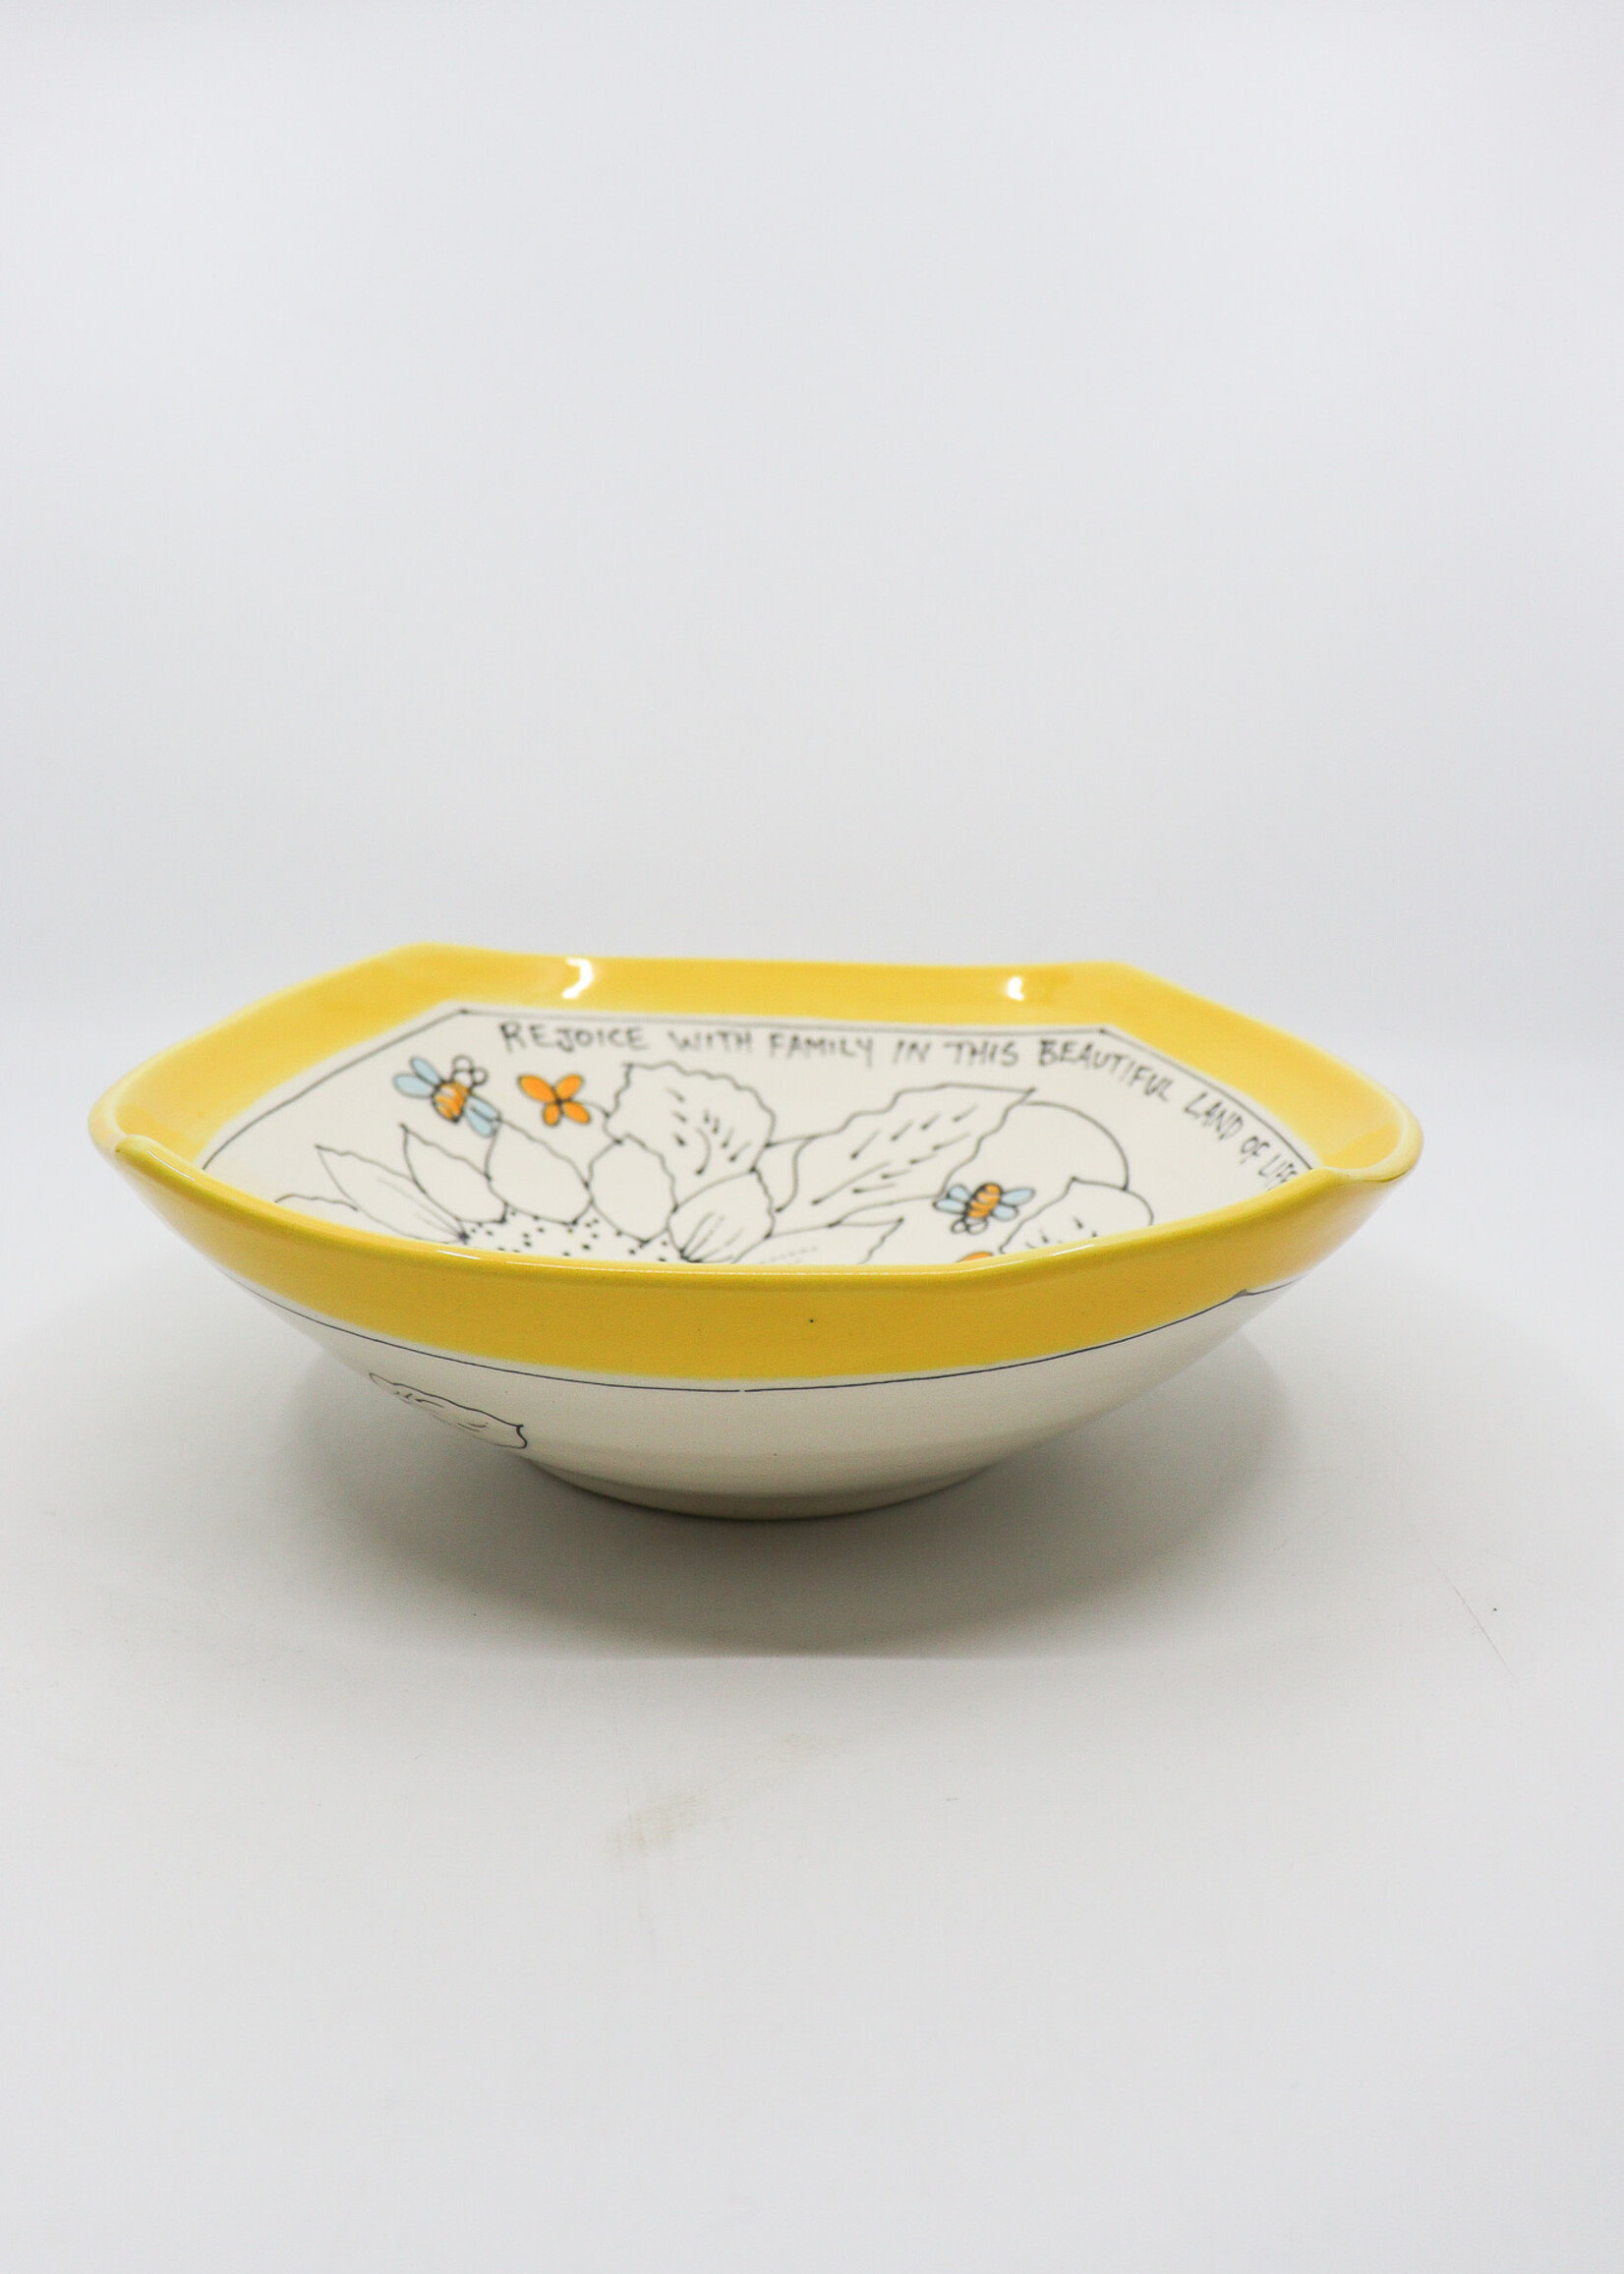 CERAMICS - 8" Bowl, Yellow Sunflowers ,  "Rejoice with the Family in this Beautiful Land of Life"